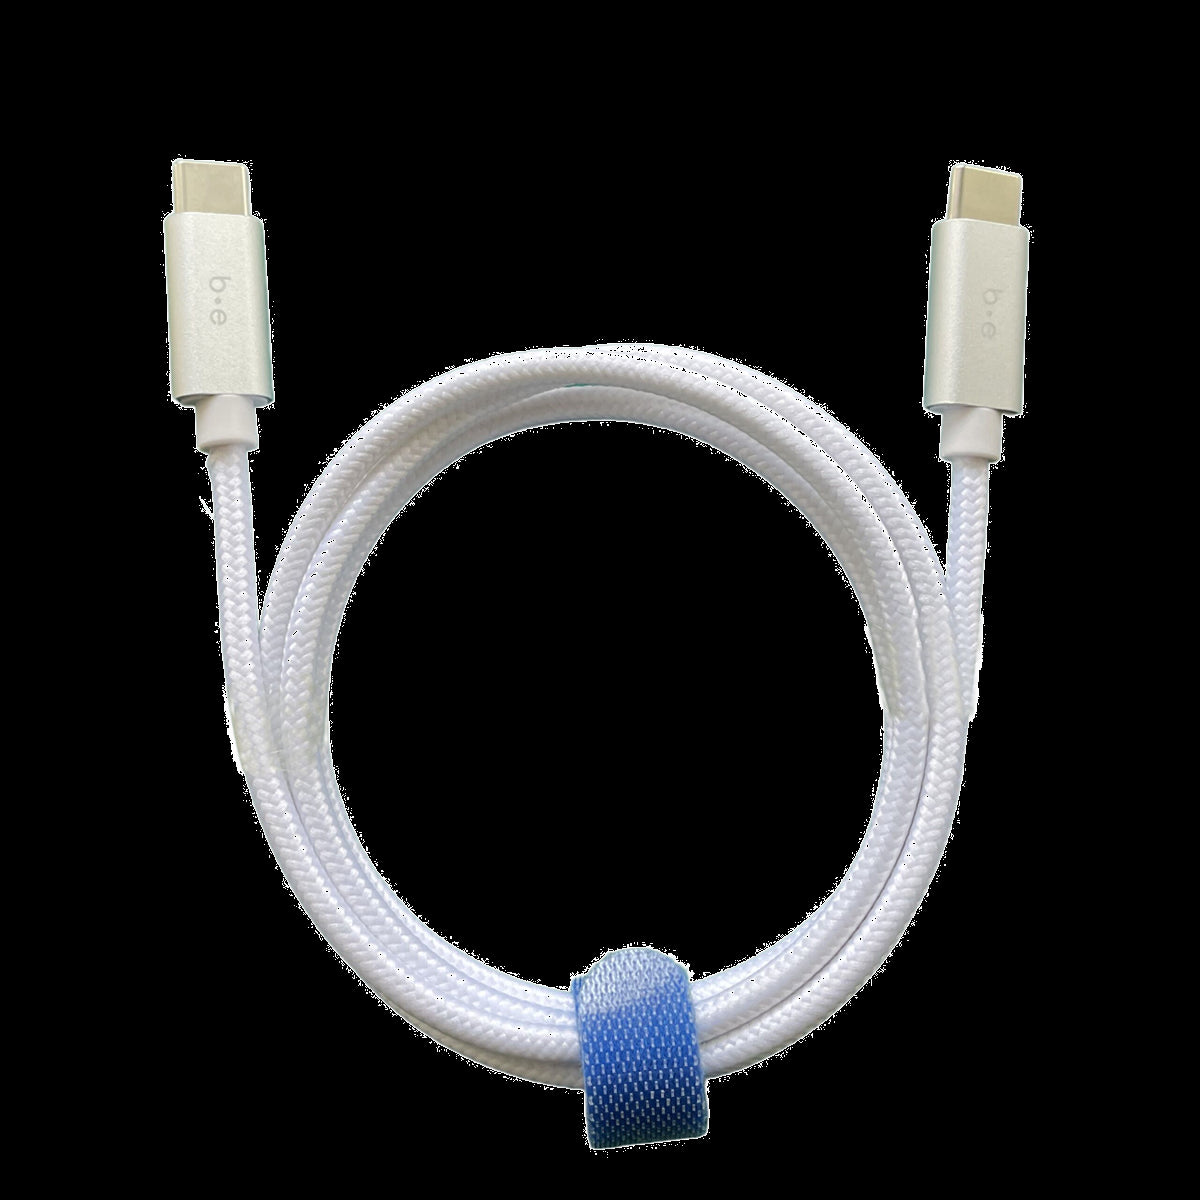 BEC2C5W Braided Charge/Sync USB-C to USB-C Cable 4ft White